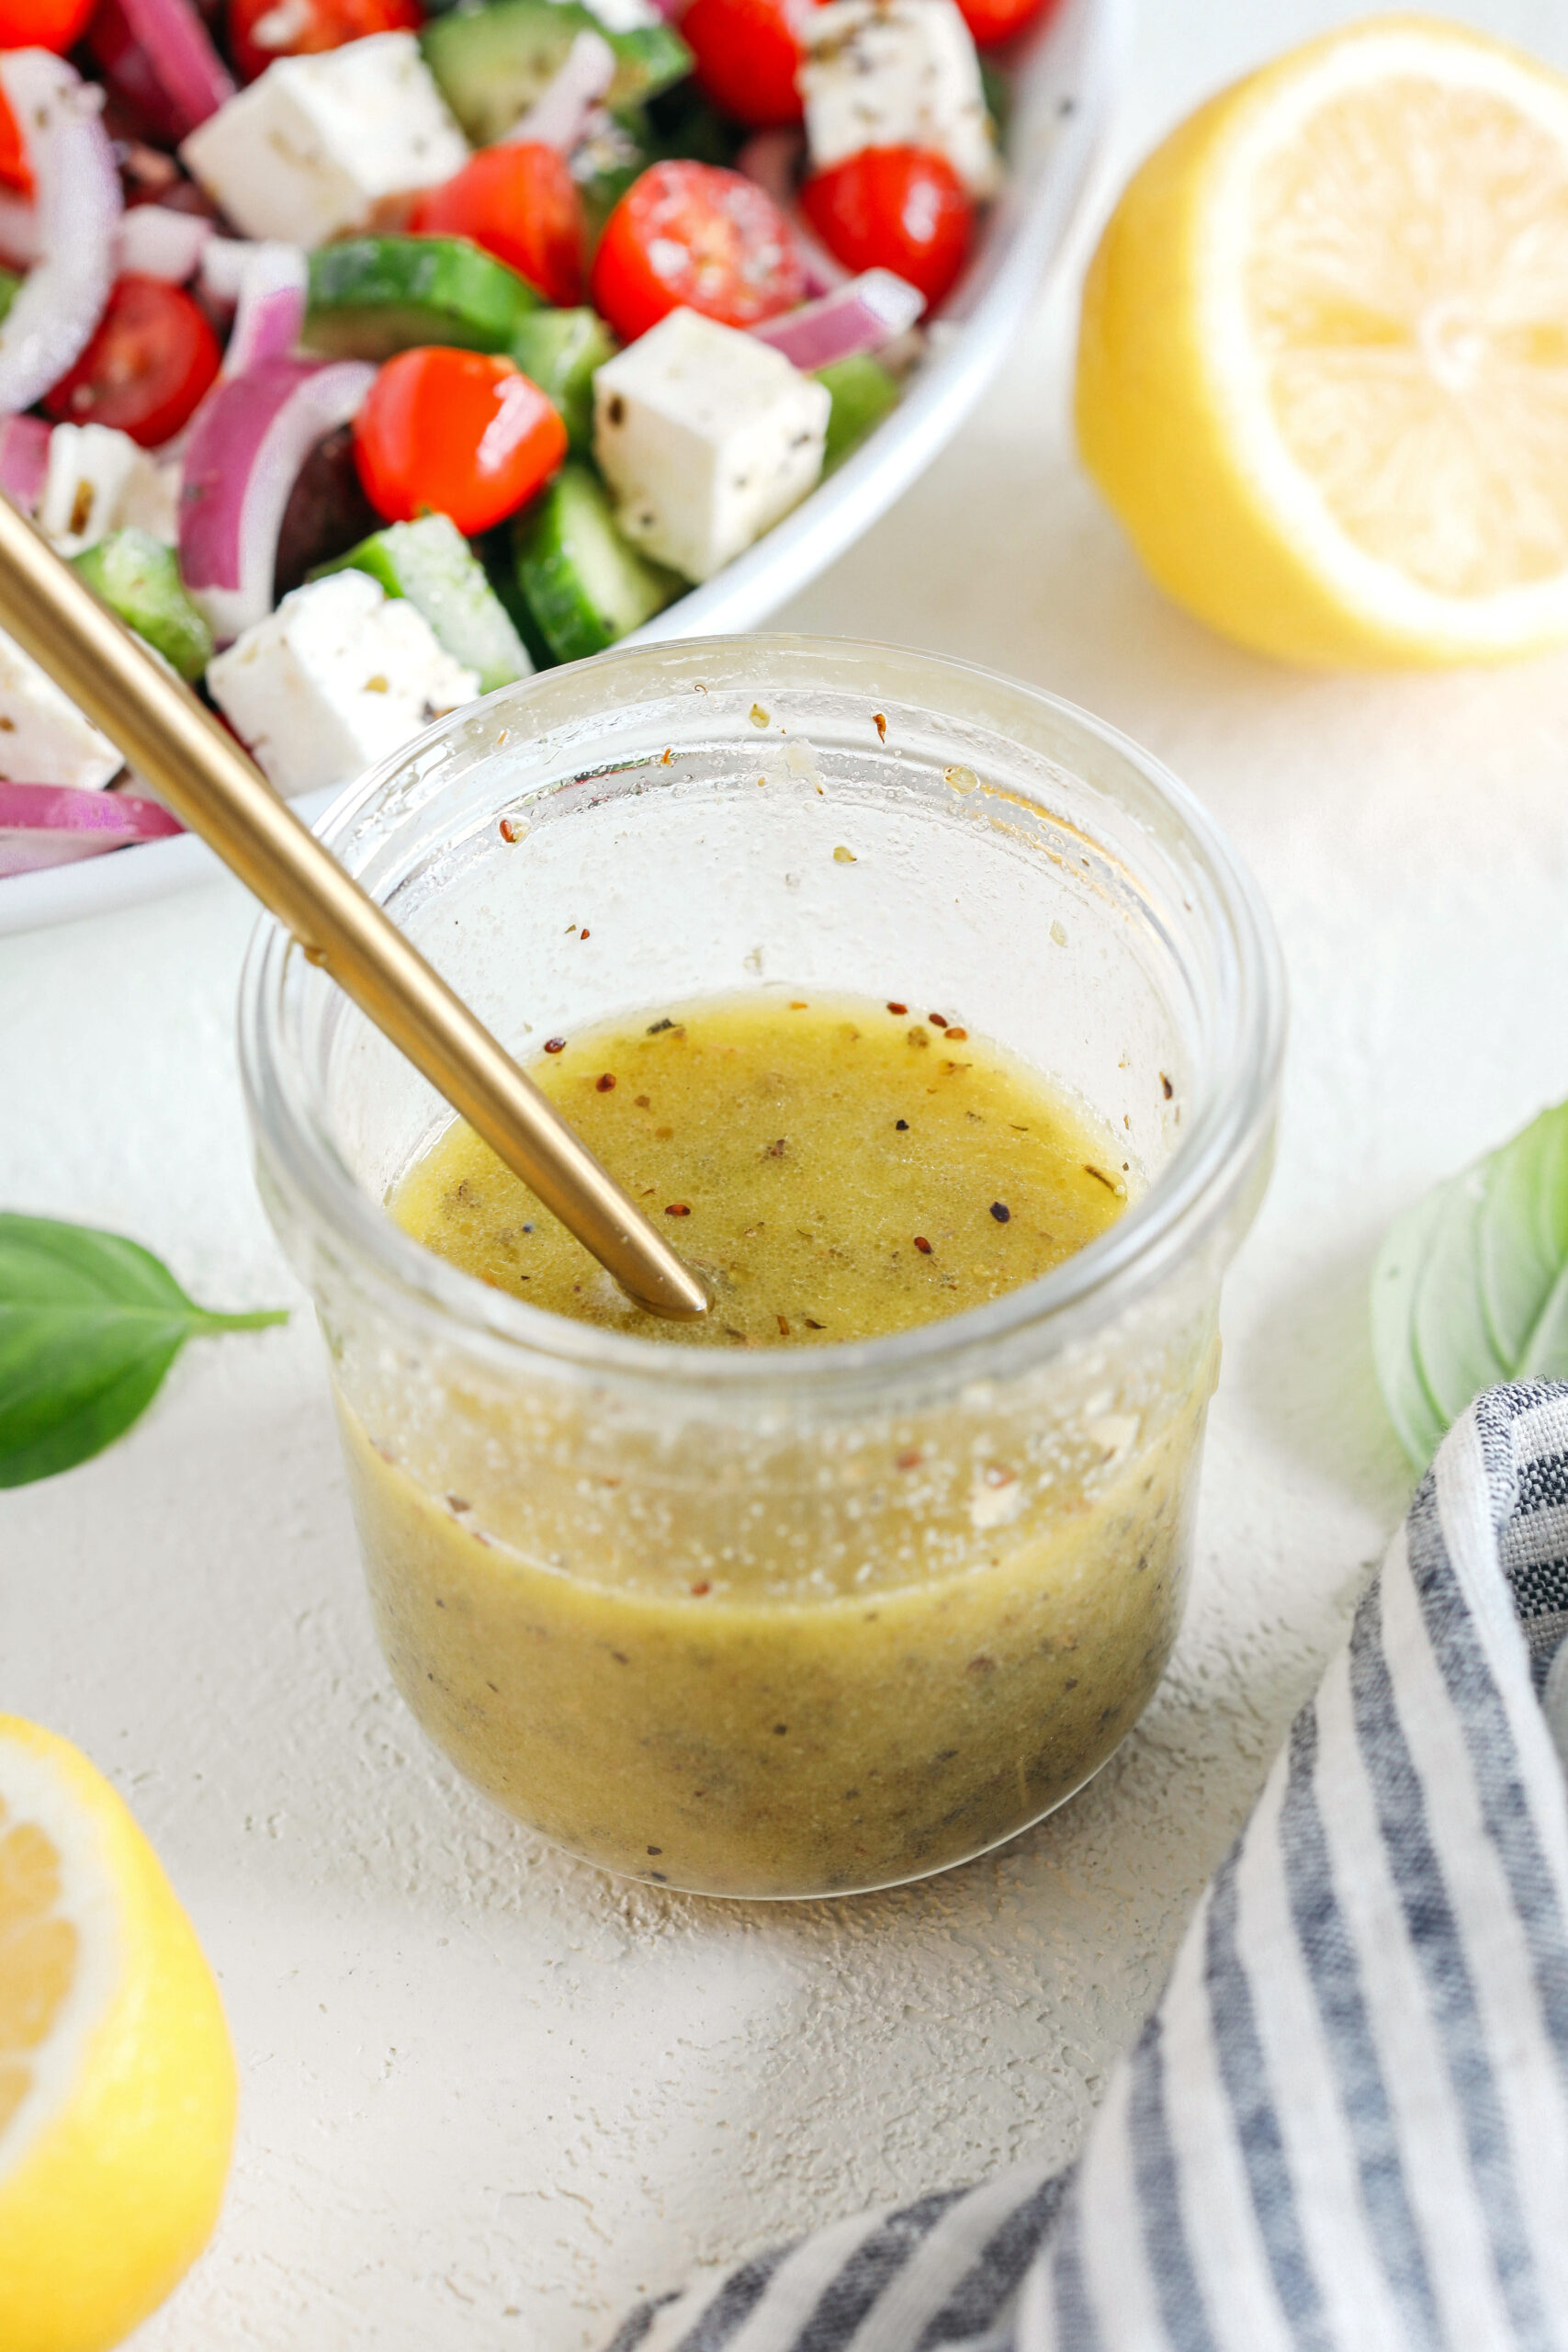 The most delicious homemade Greek Salad Dressing made with simple pantry ingredients perfect over salads, veggies, used as a marinade, pasta salads and more!